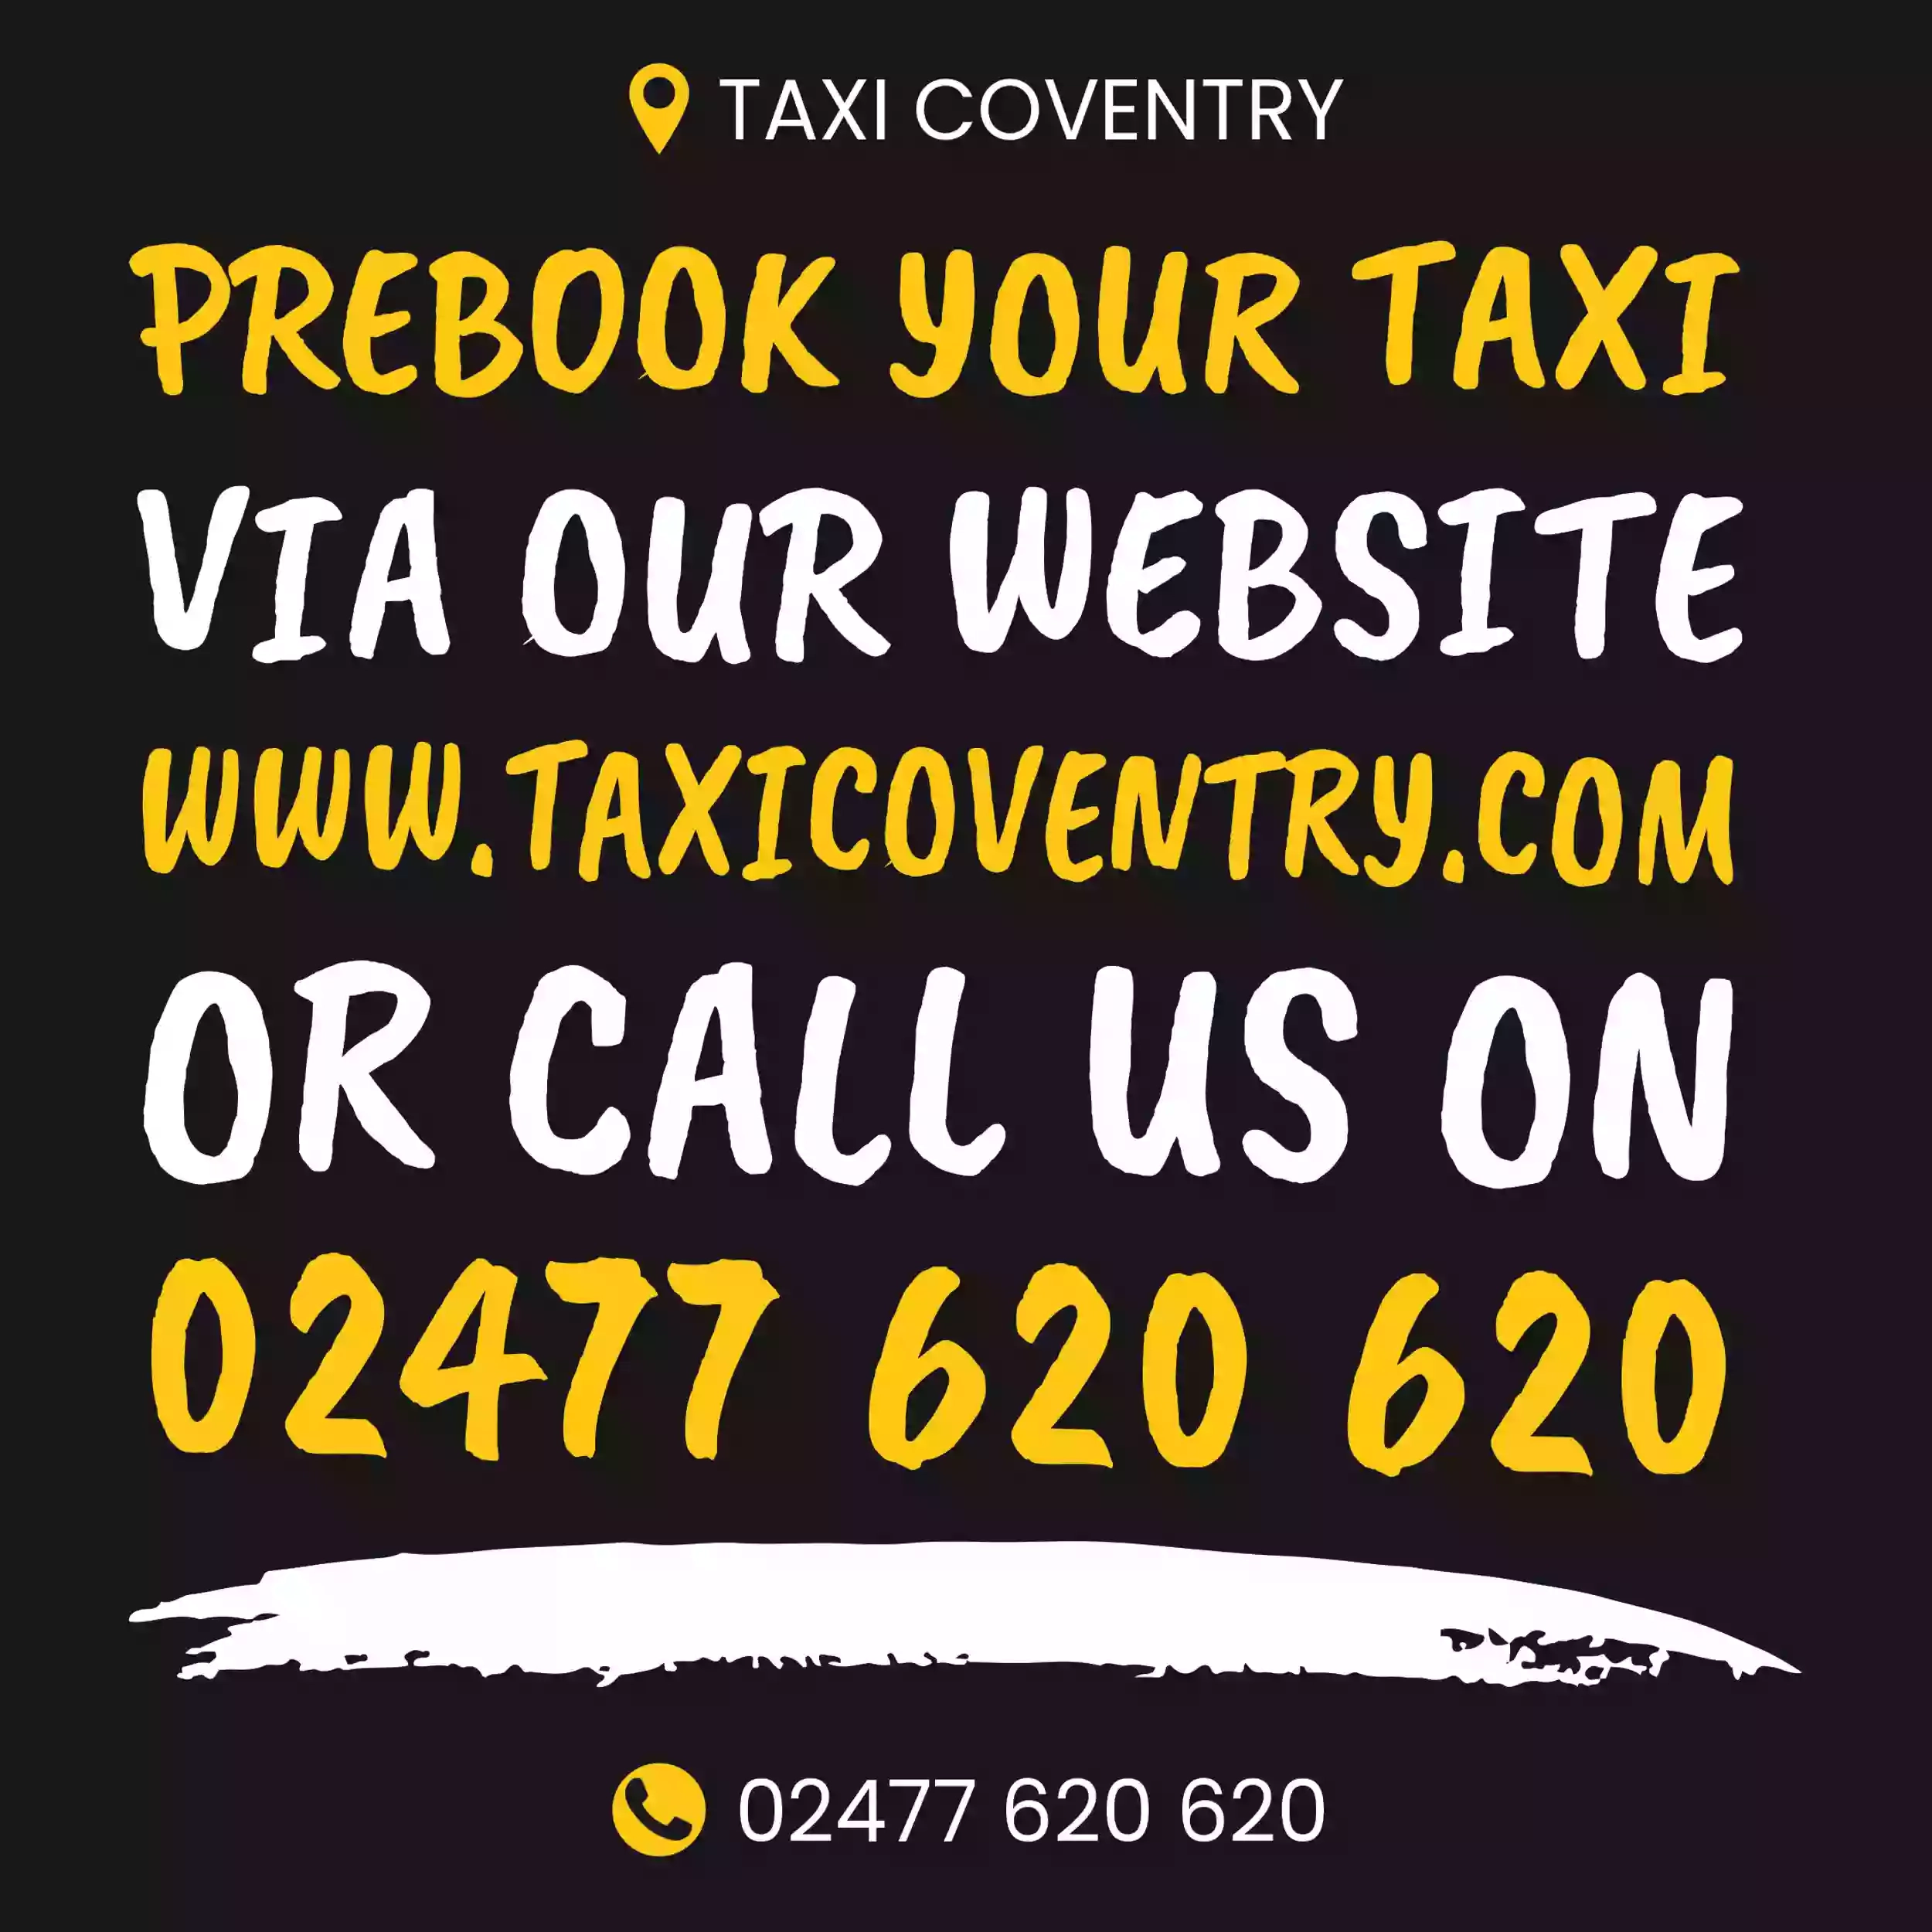 Taxi Coventry